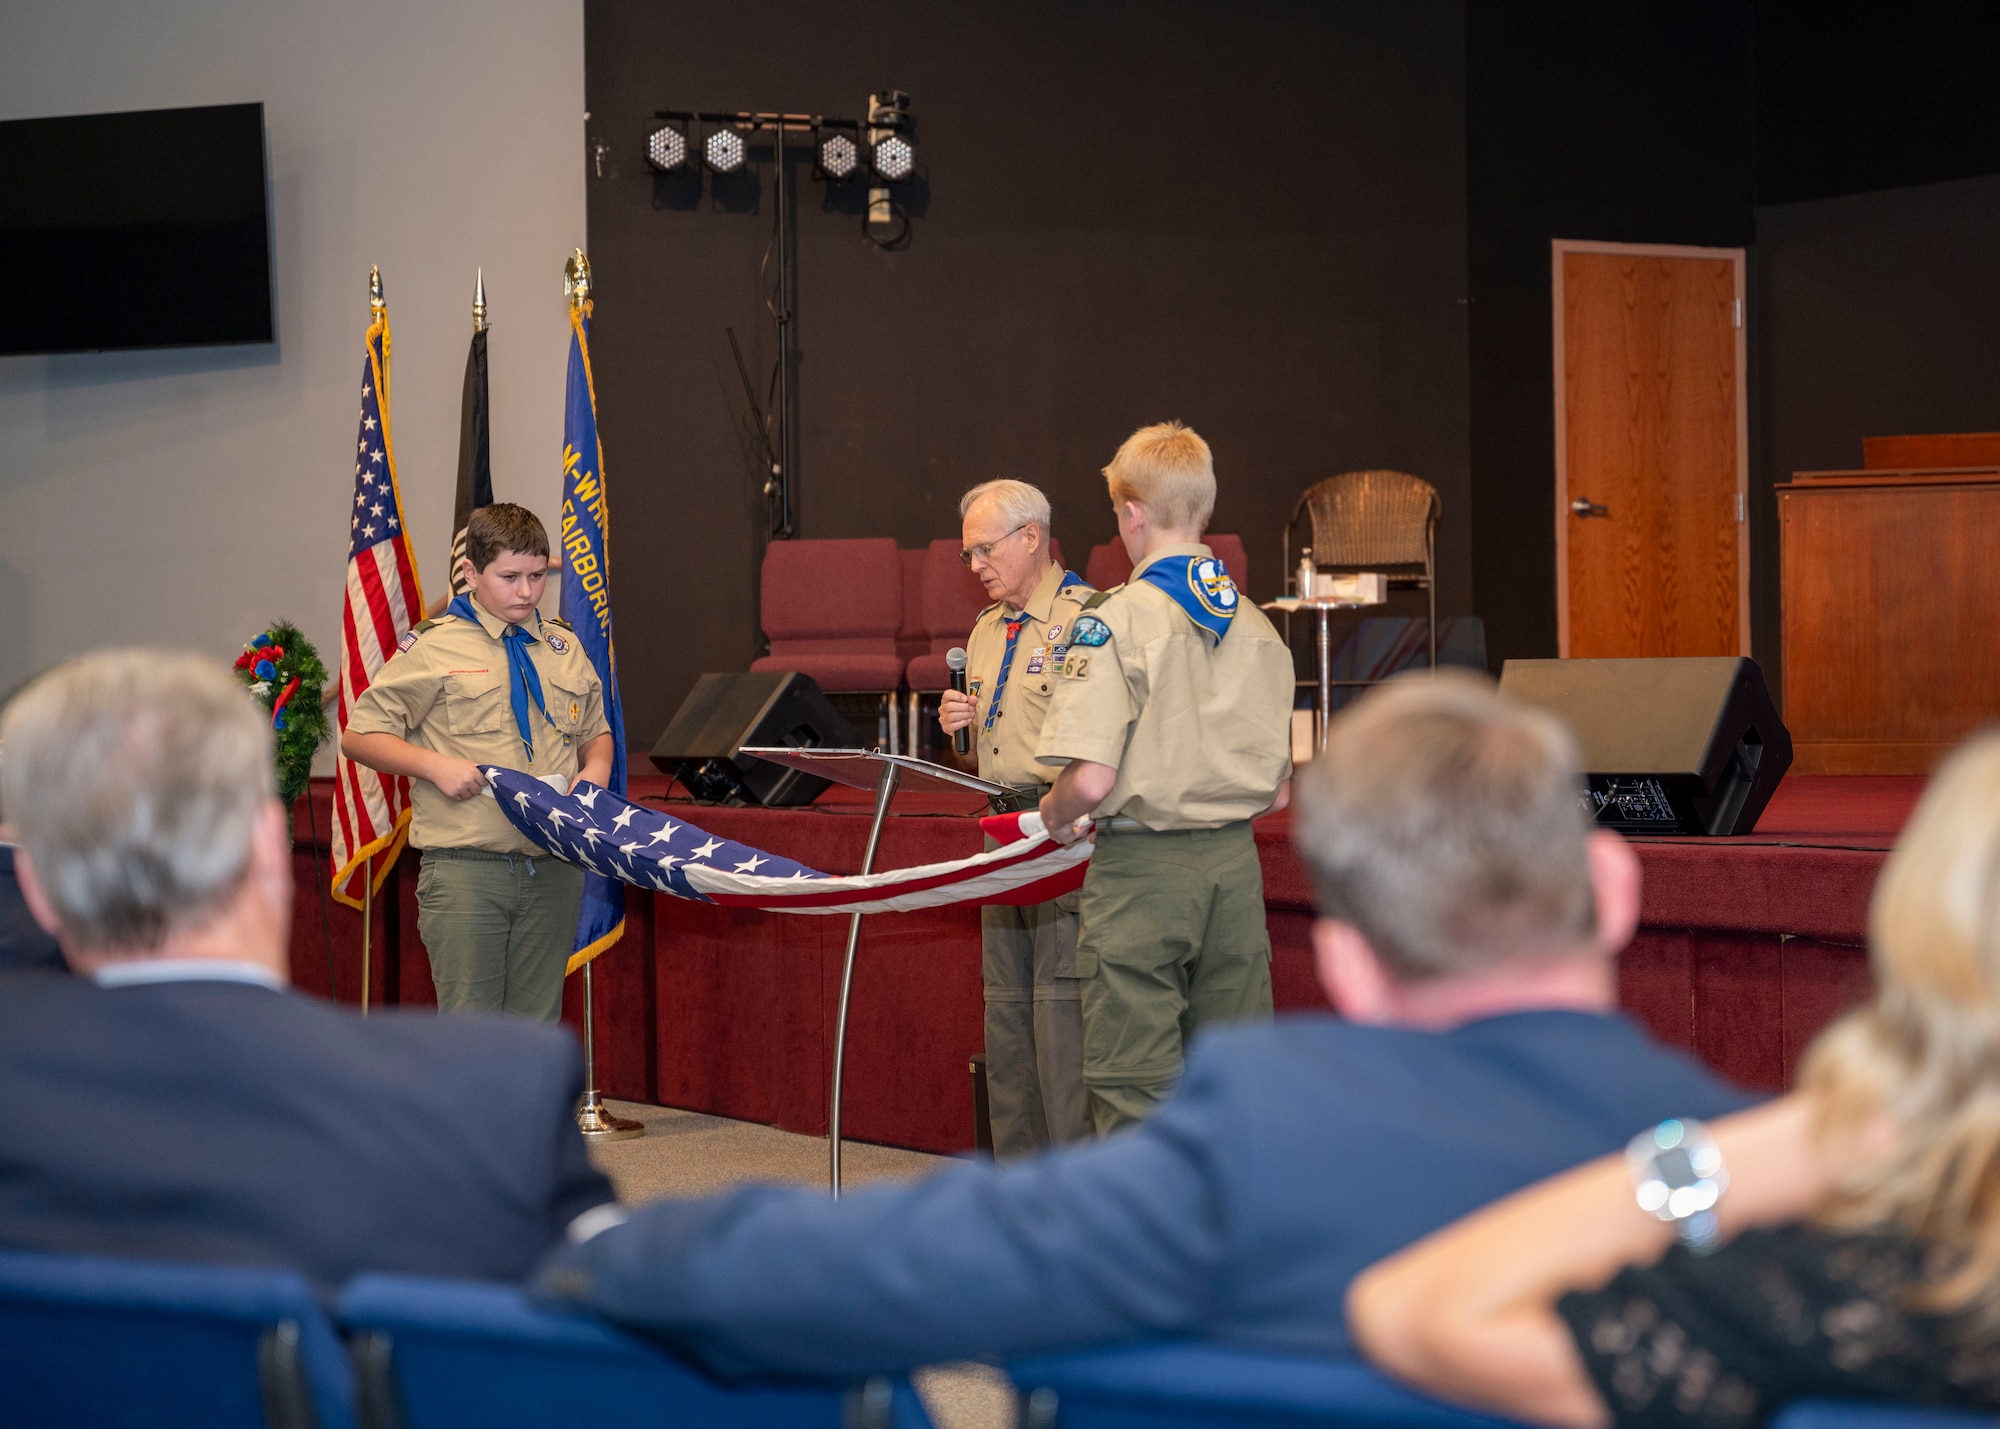 Boy Scout troop 162 performs a 13-fold procedure on an American flag during a Veterans Day ceremony at the United Methodist Church in Fairborn, Ohio, Nov. 11, 2023. Each of the 13 folds holds a special significance. The flag is folded 13 times into a triangle so that only the blue field with stars are visible. (U.S. Air Force photo by Staff Sgt. Mikaley Kline)